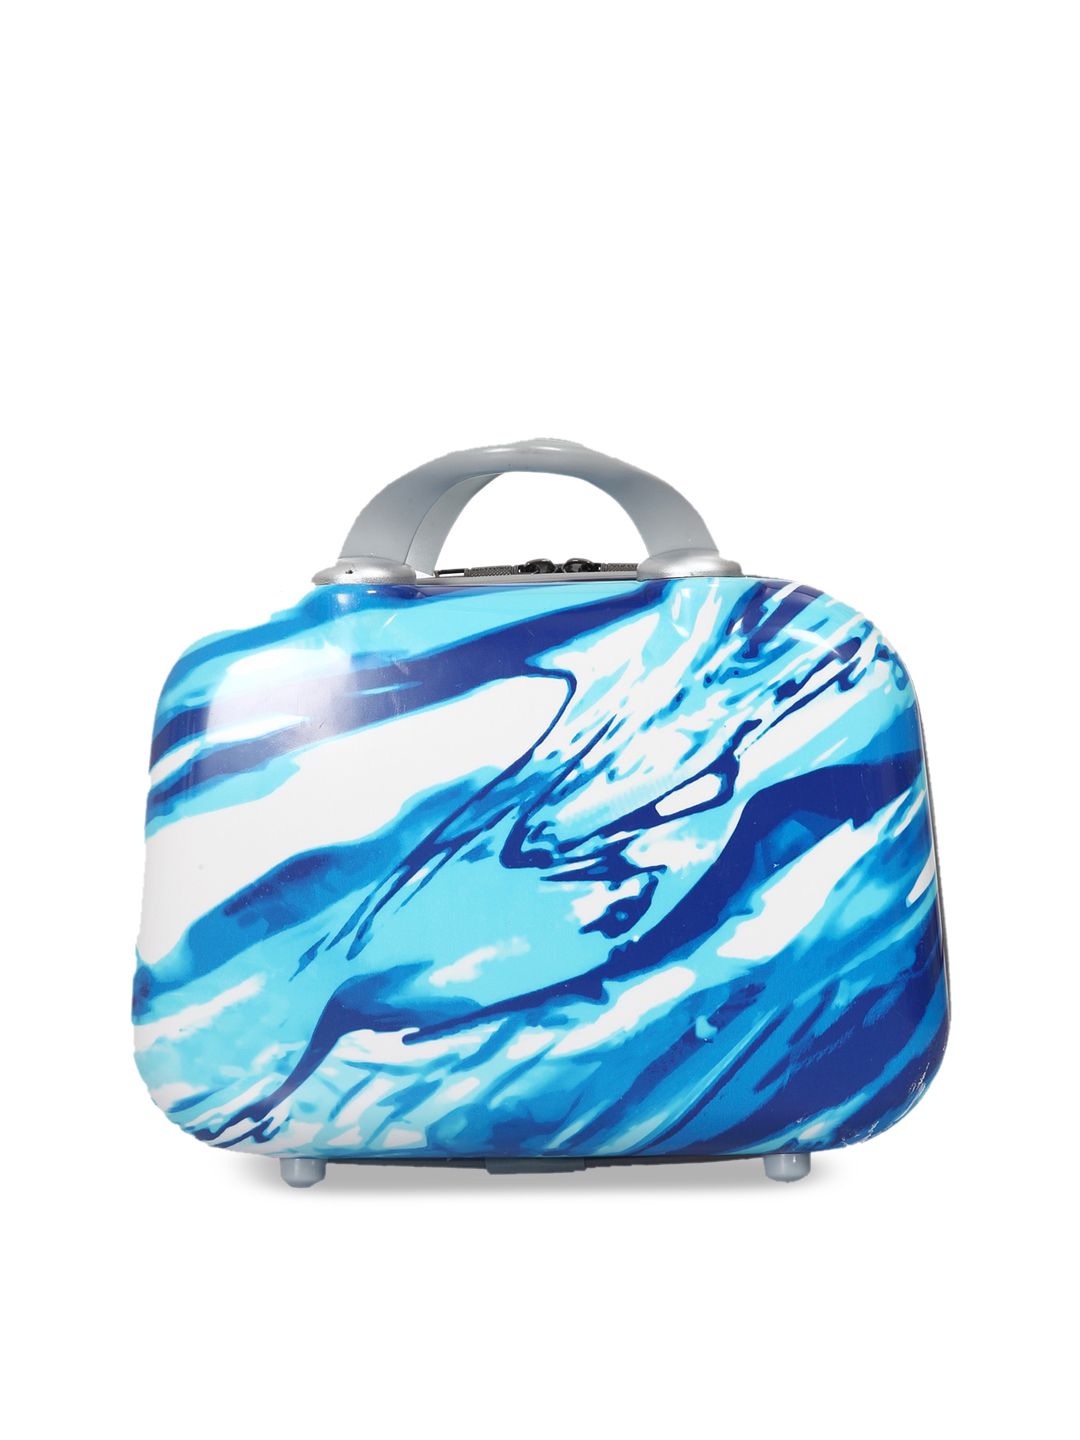 Polo Class Blue & White Printed Hard-Sided Travel Vanity Suitcase Price in India